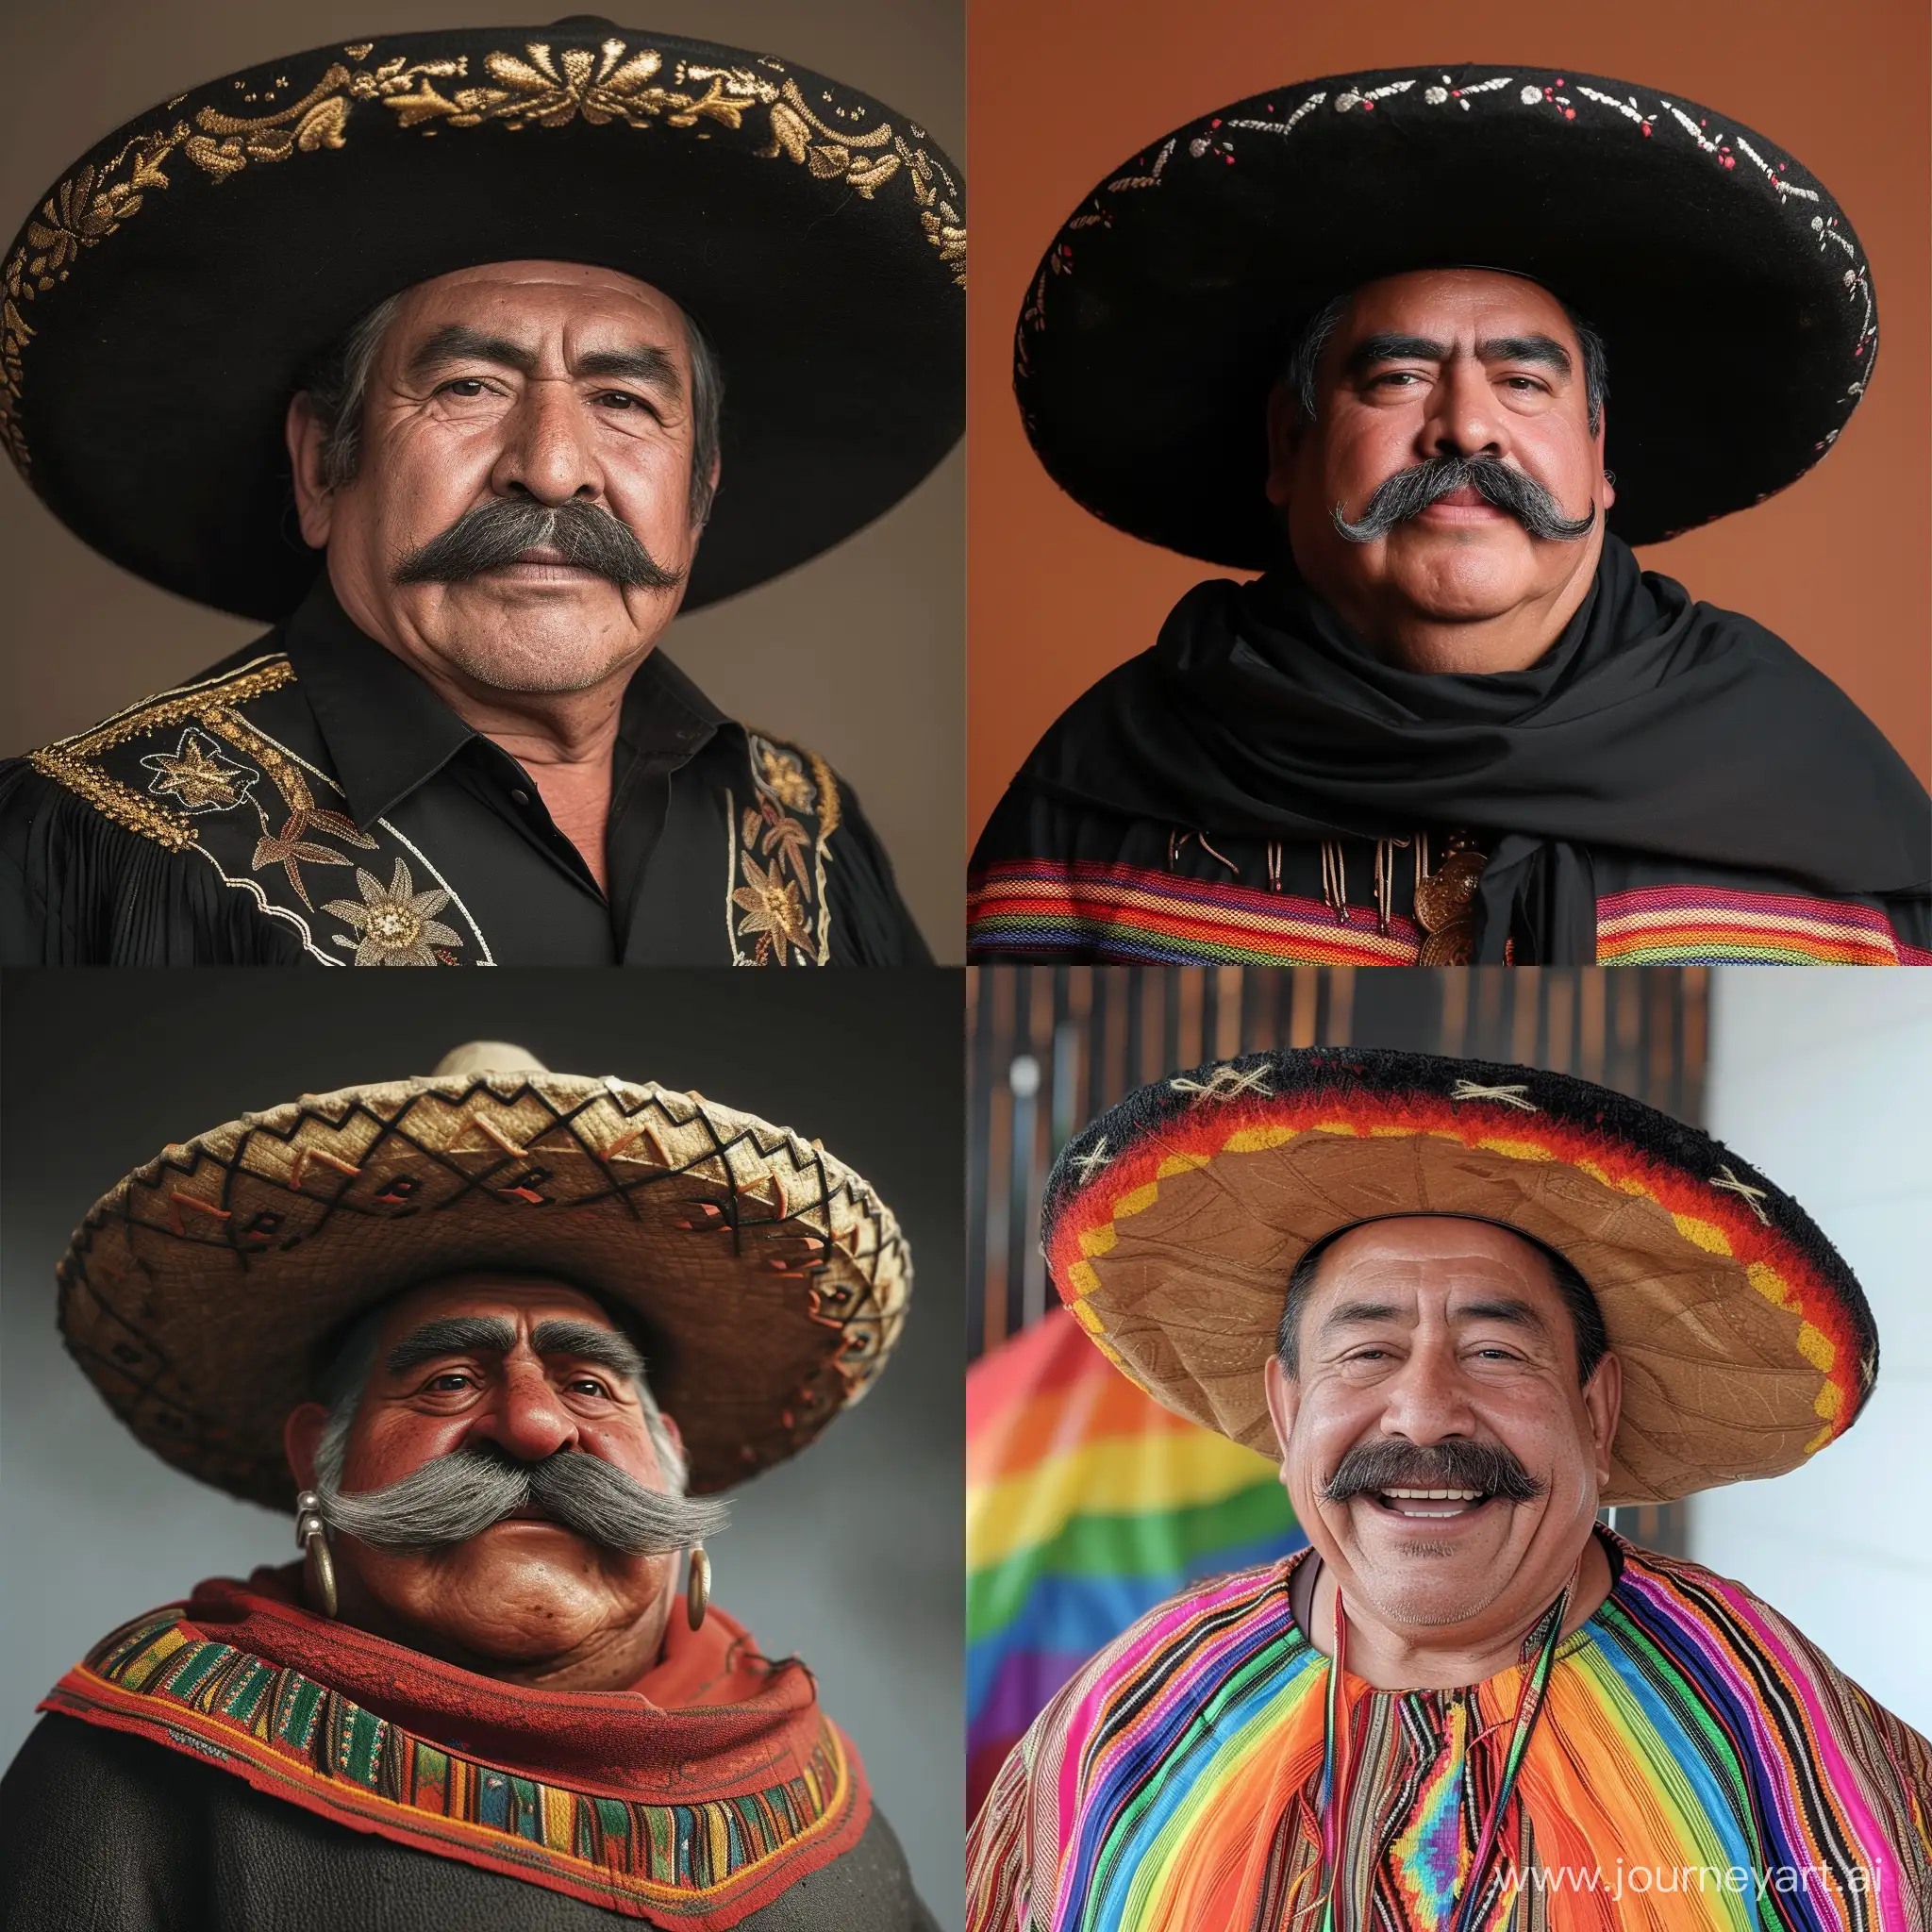 Colorful-Mexican-Celebration-Festive-Man-Wearing-Oversized-Sombrero-and-Mustache